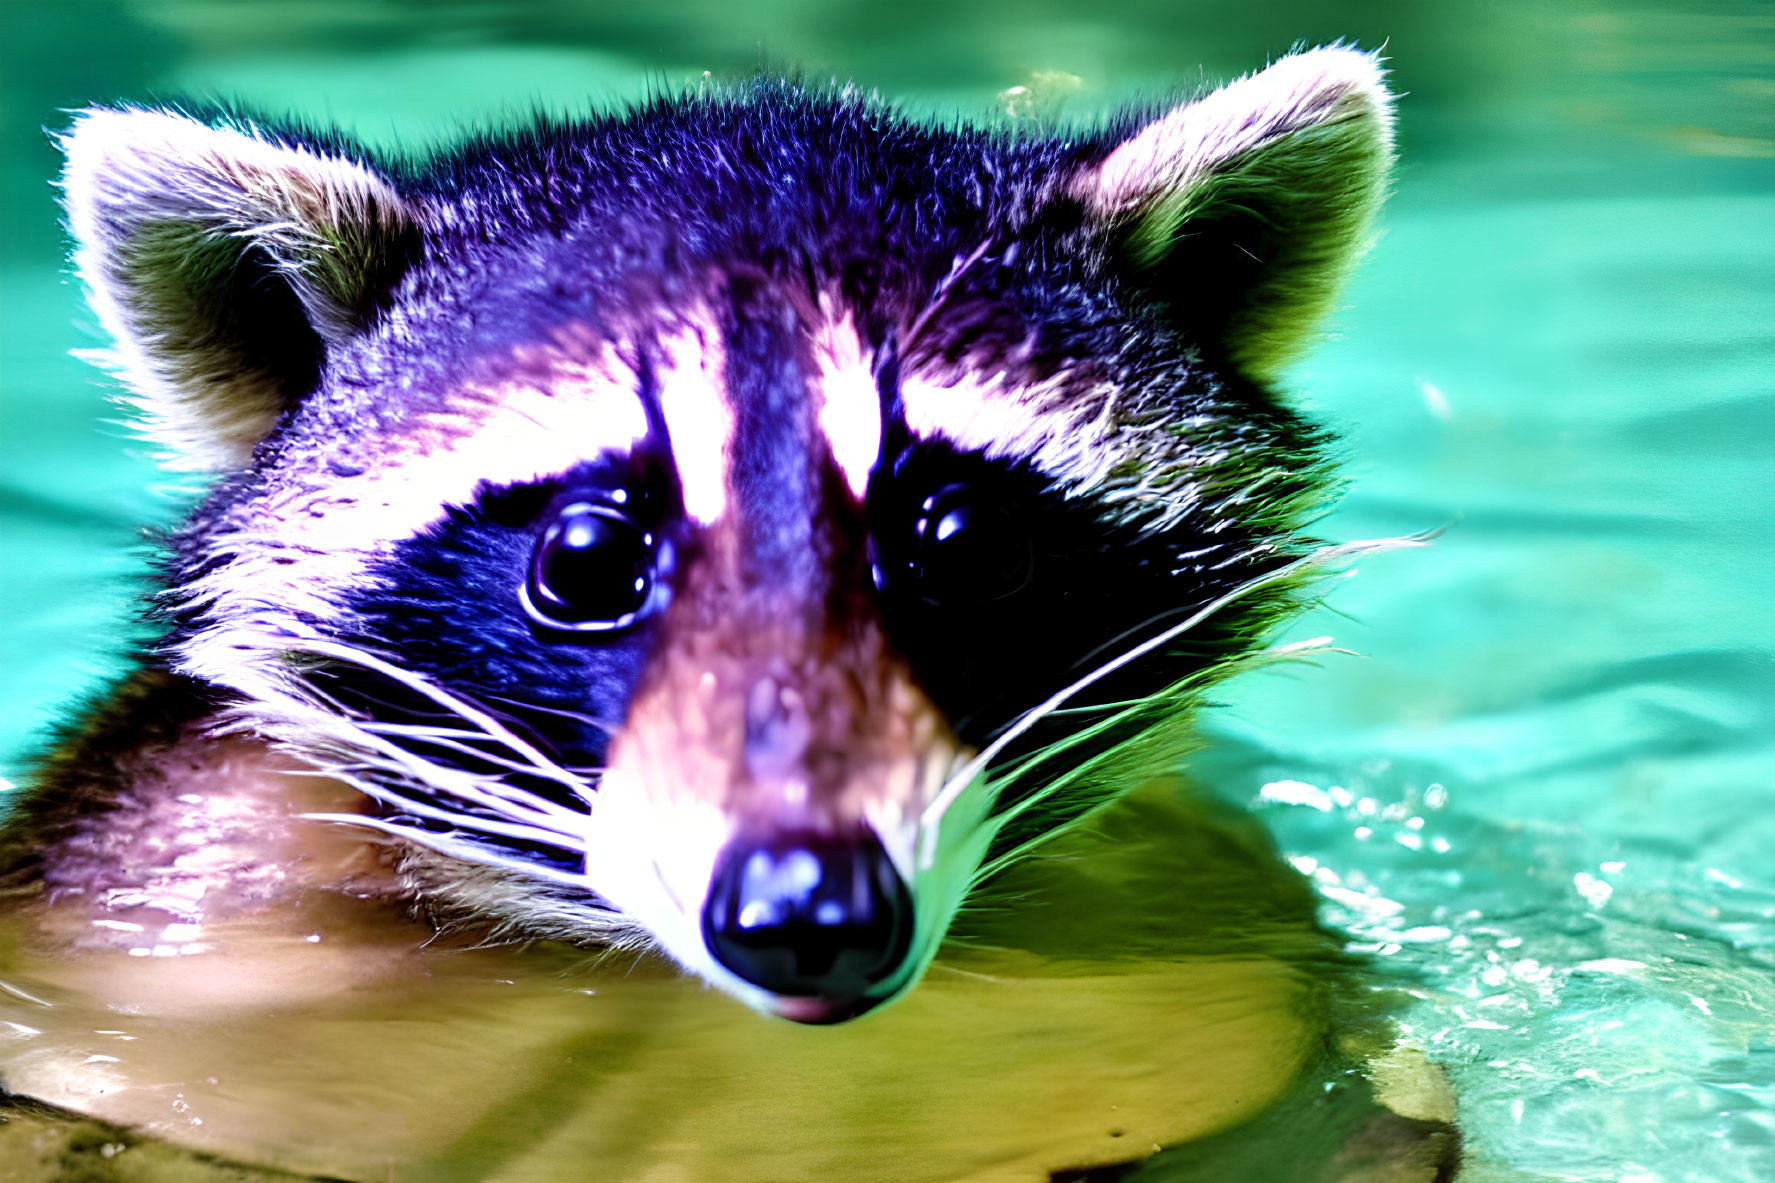 Close-up of raccoon's face in water with vibrant reflections and dark eyes